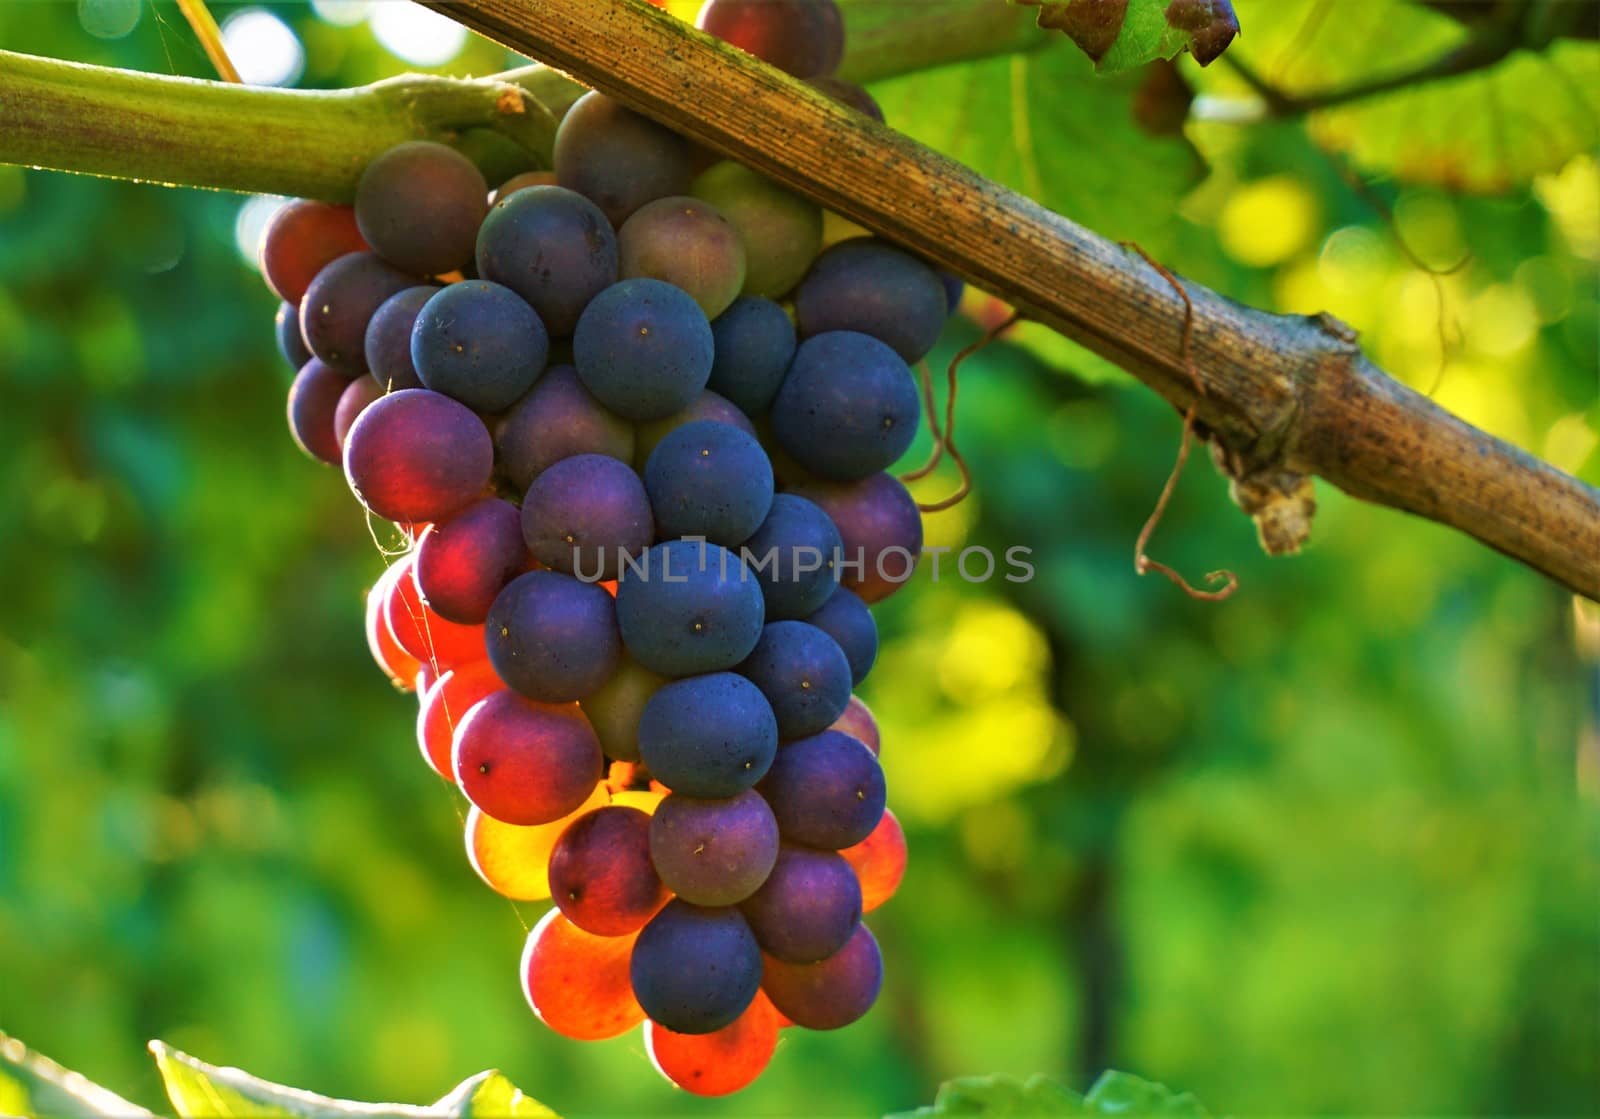 A photo of blue grapes in the sun